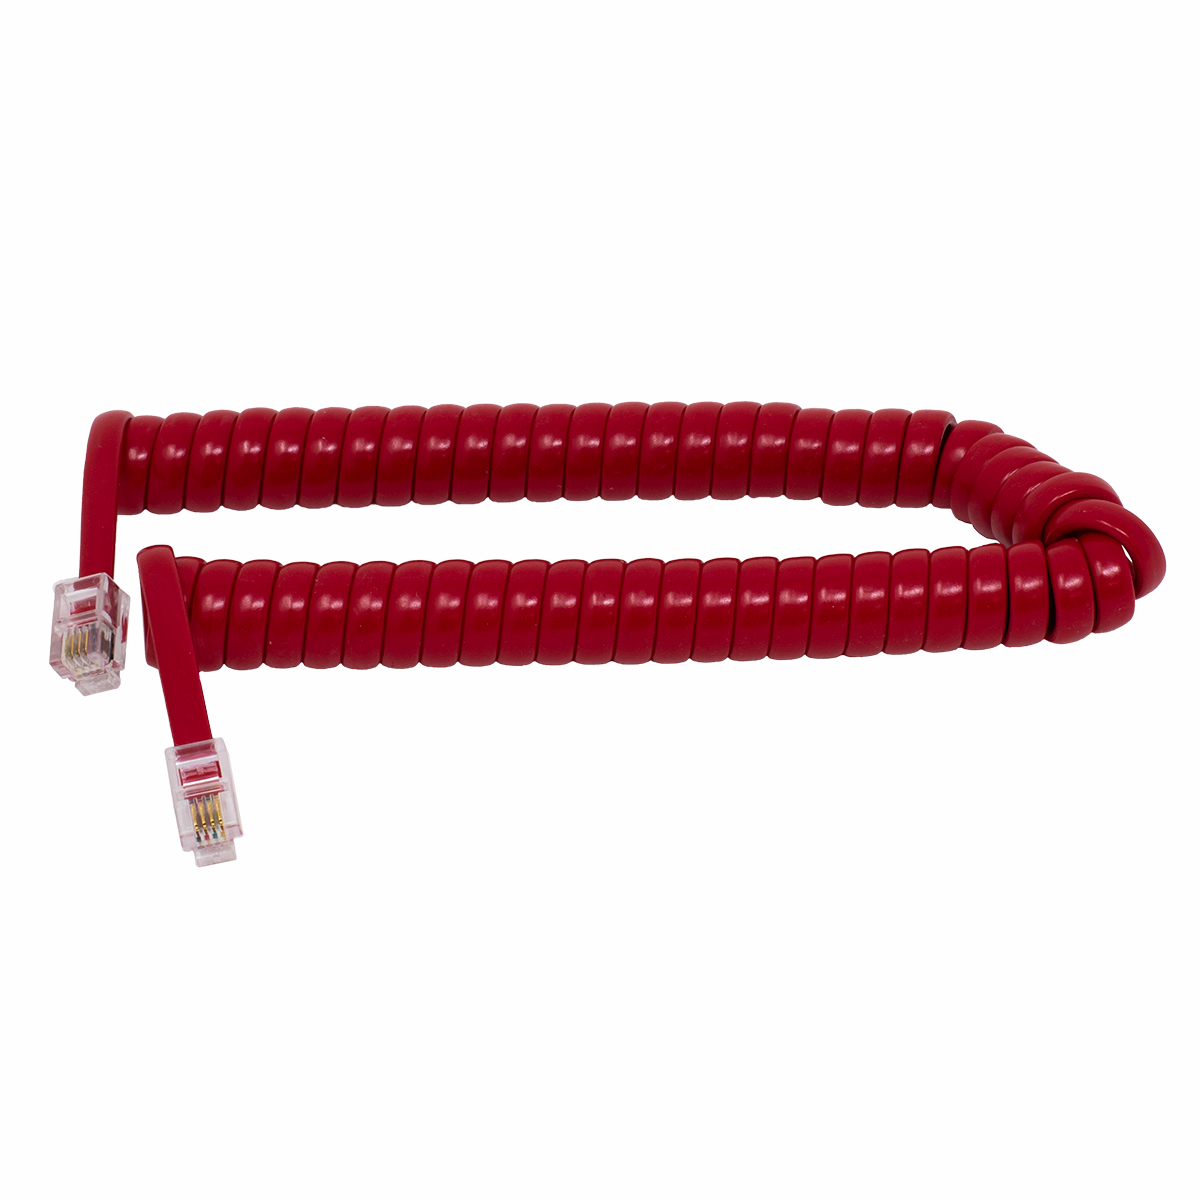 7' Cherry Red Coiled Handset Cord